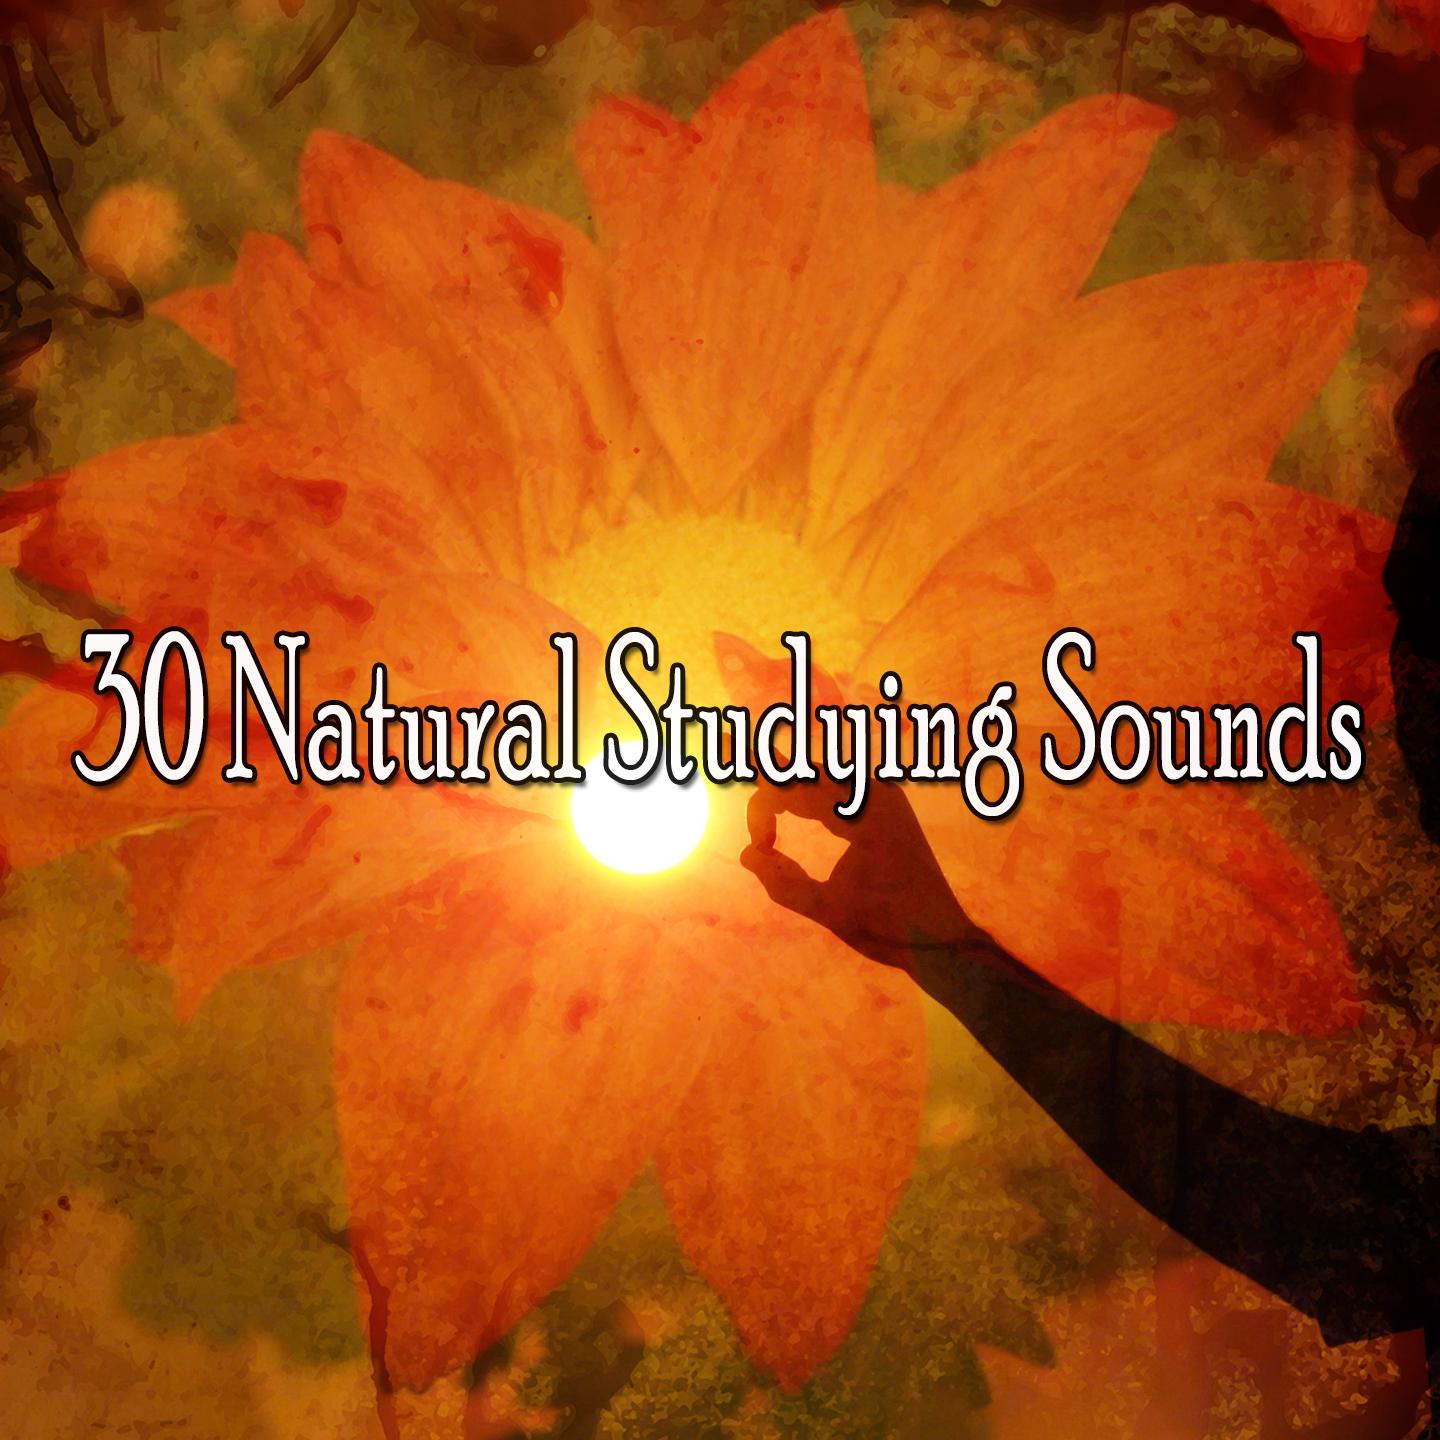 30 Natural Studying Sounds